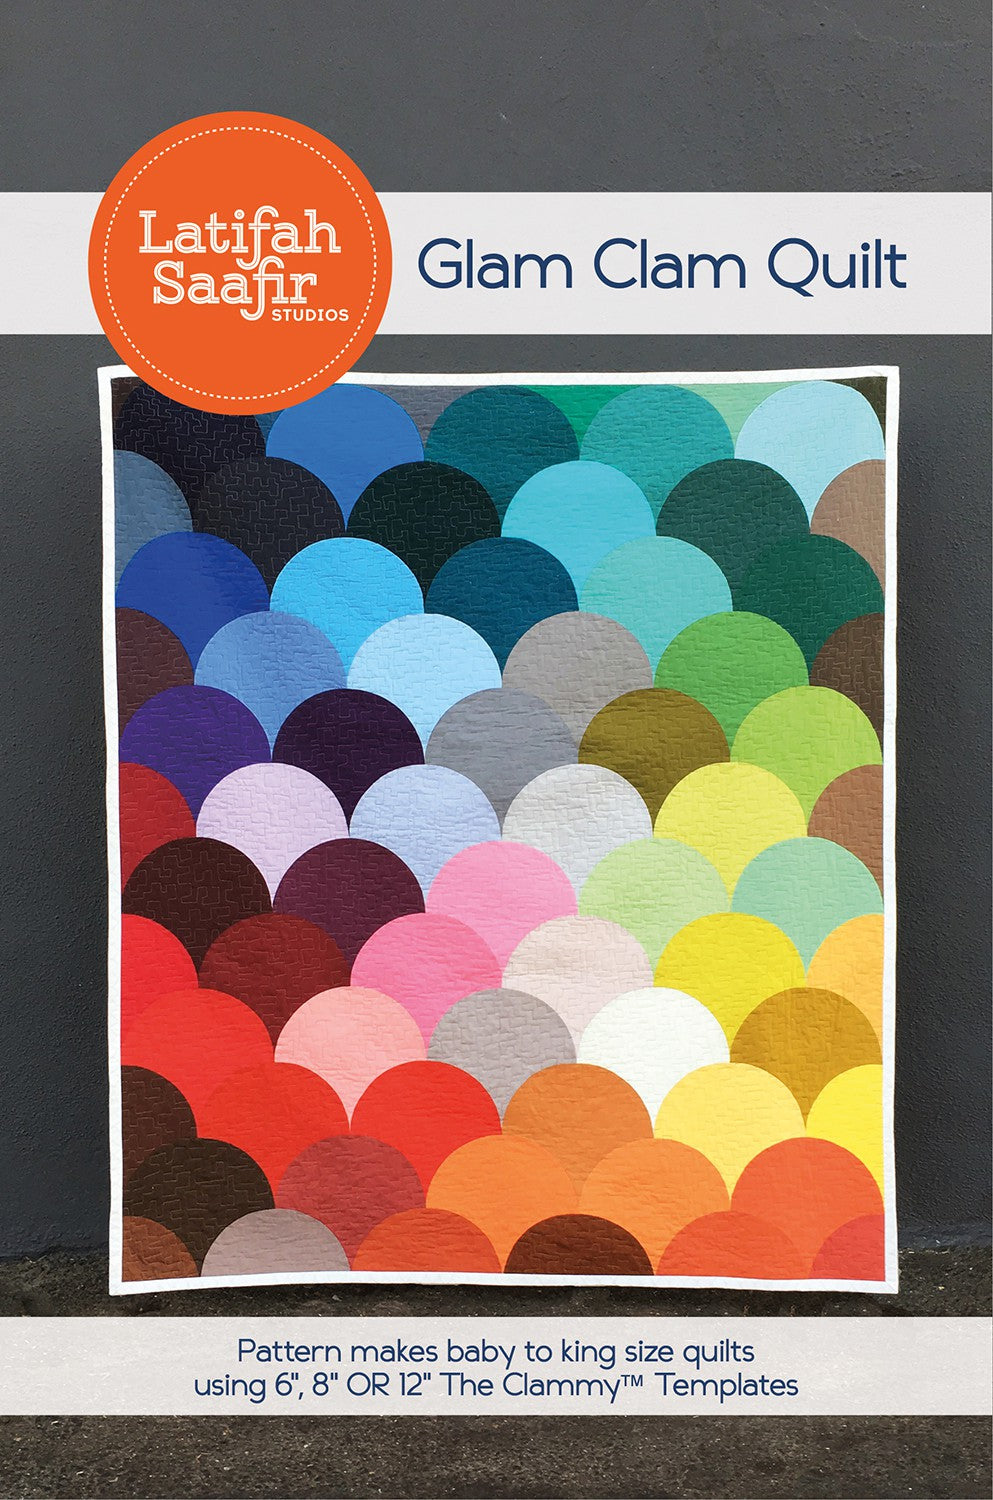 Glam Clam Quilt Pattern for Baby to King Size Quilts Using The Clammy Templates